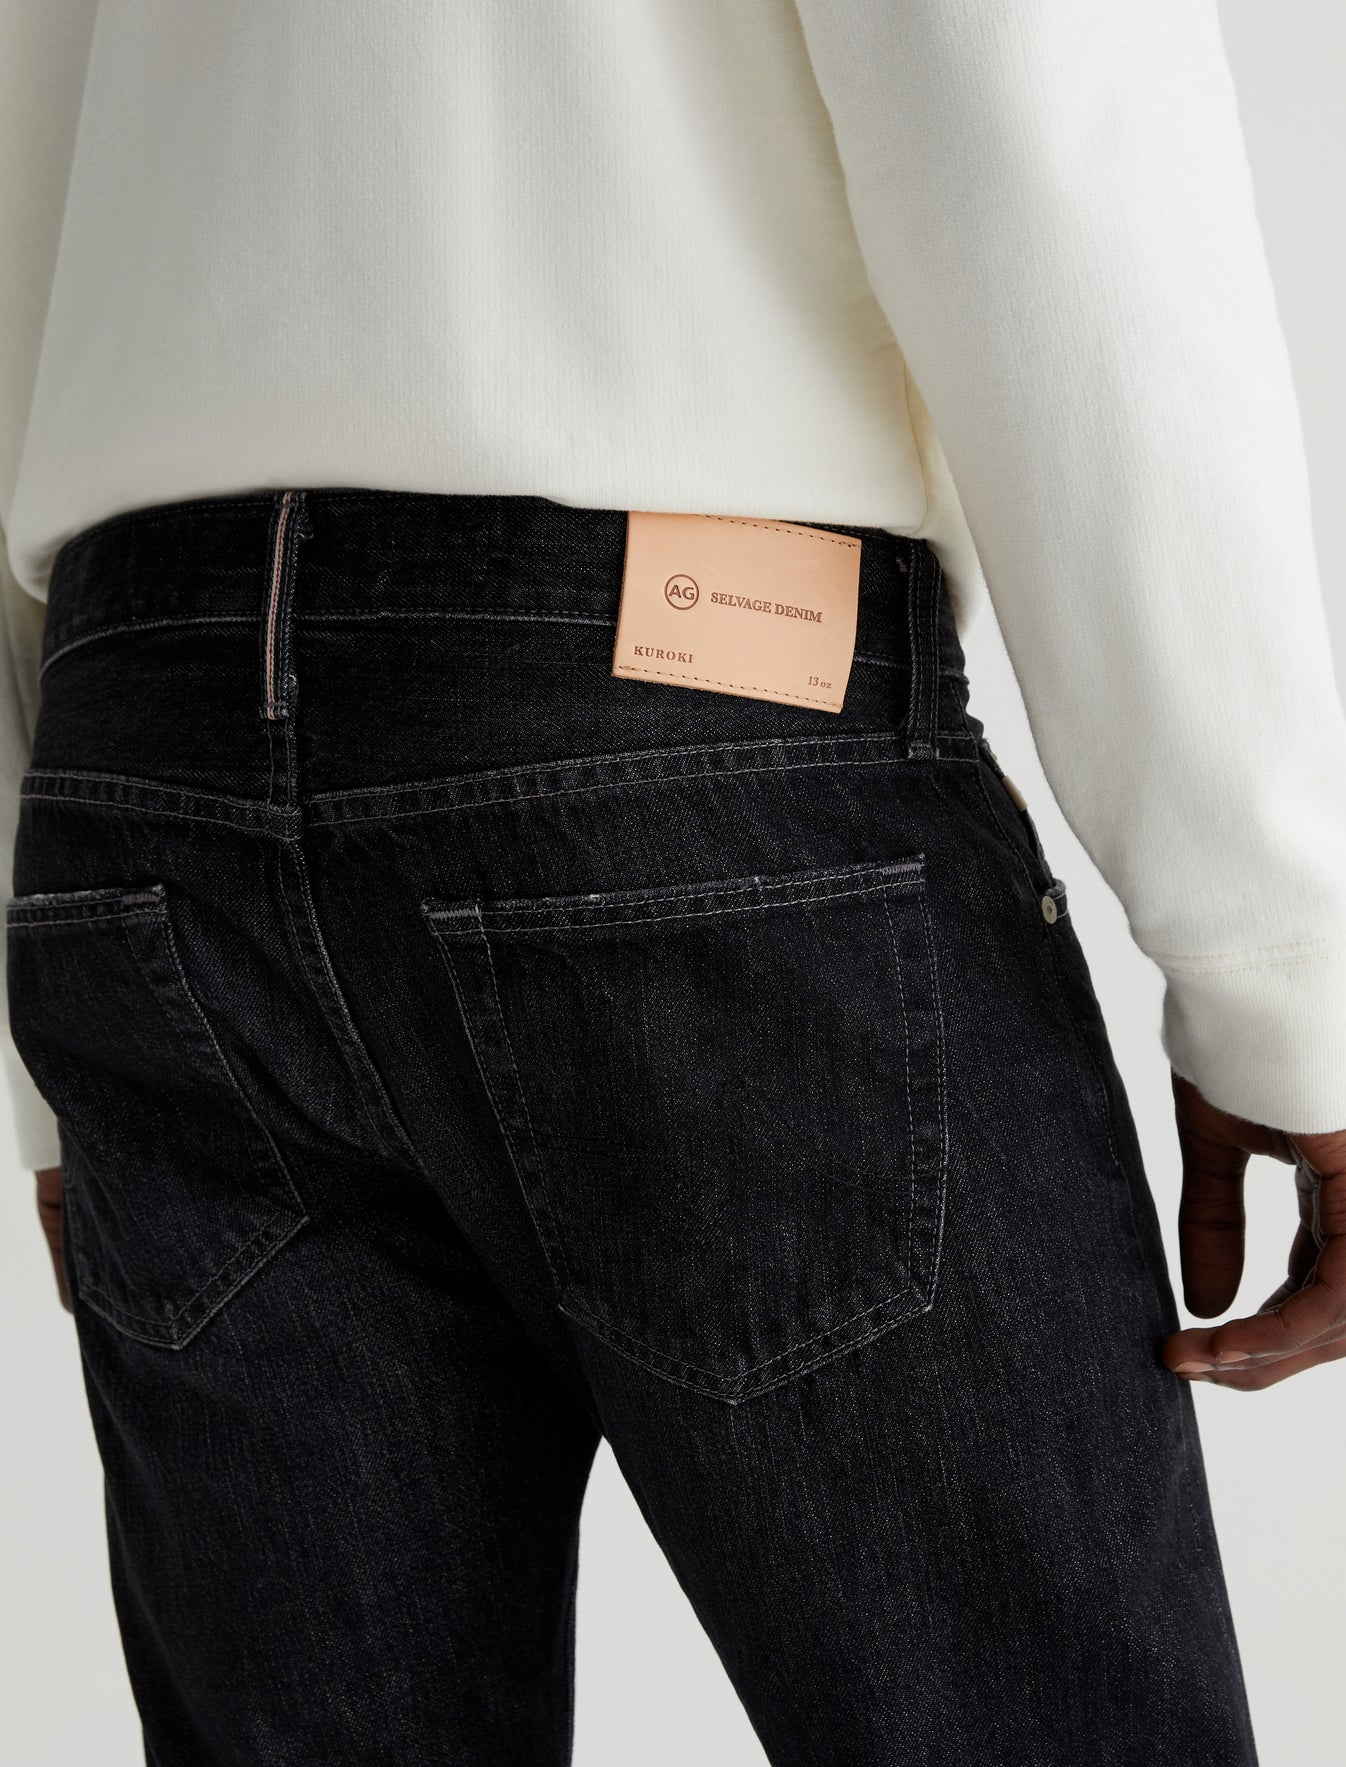 Mens Tellis Selvage 2 Years Sapporo at AG Jeans Official Store